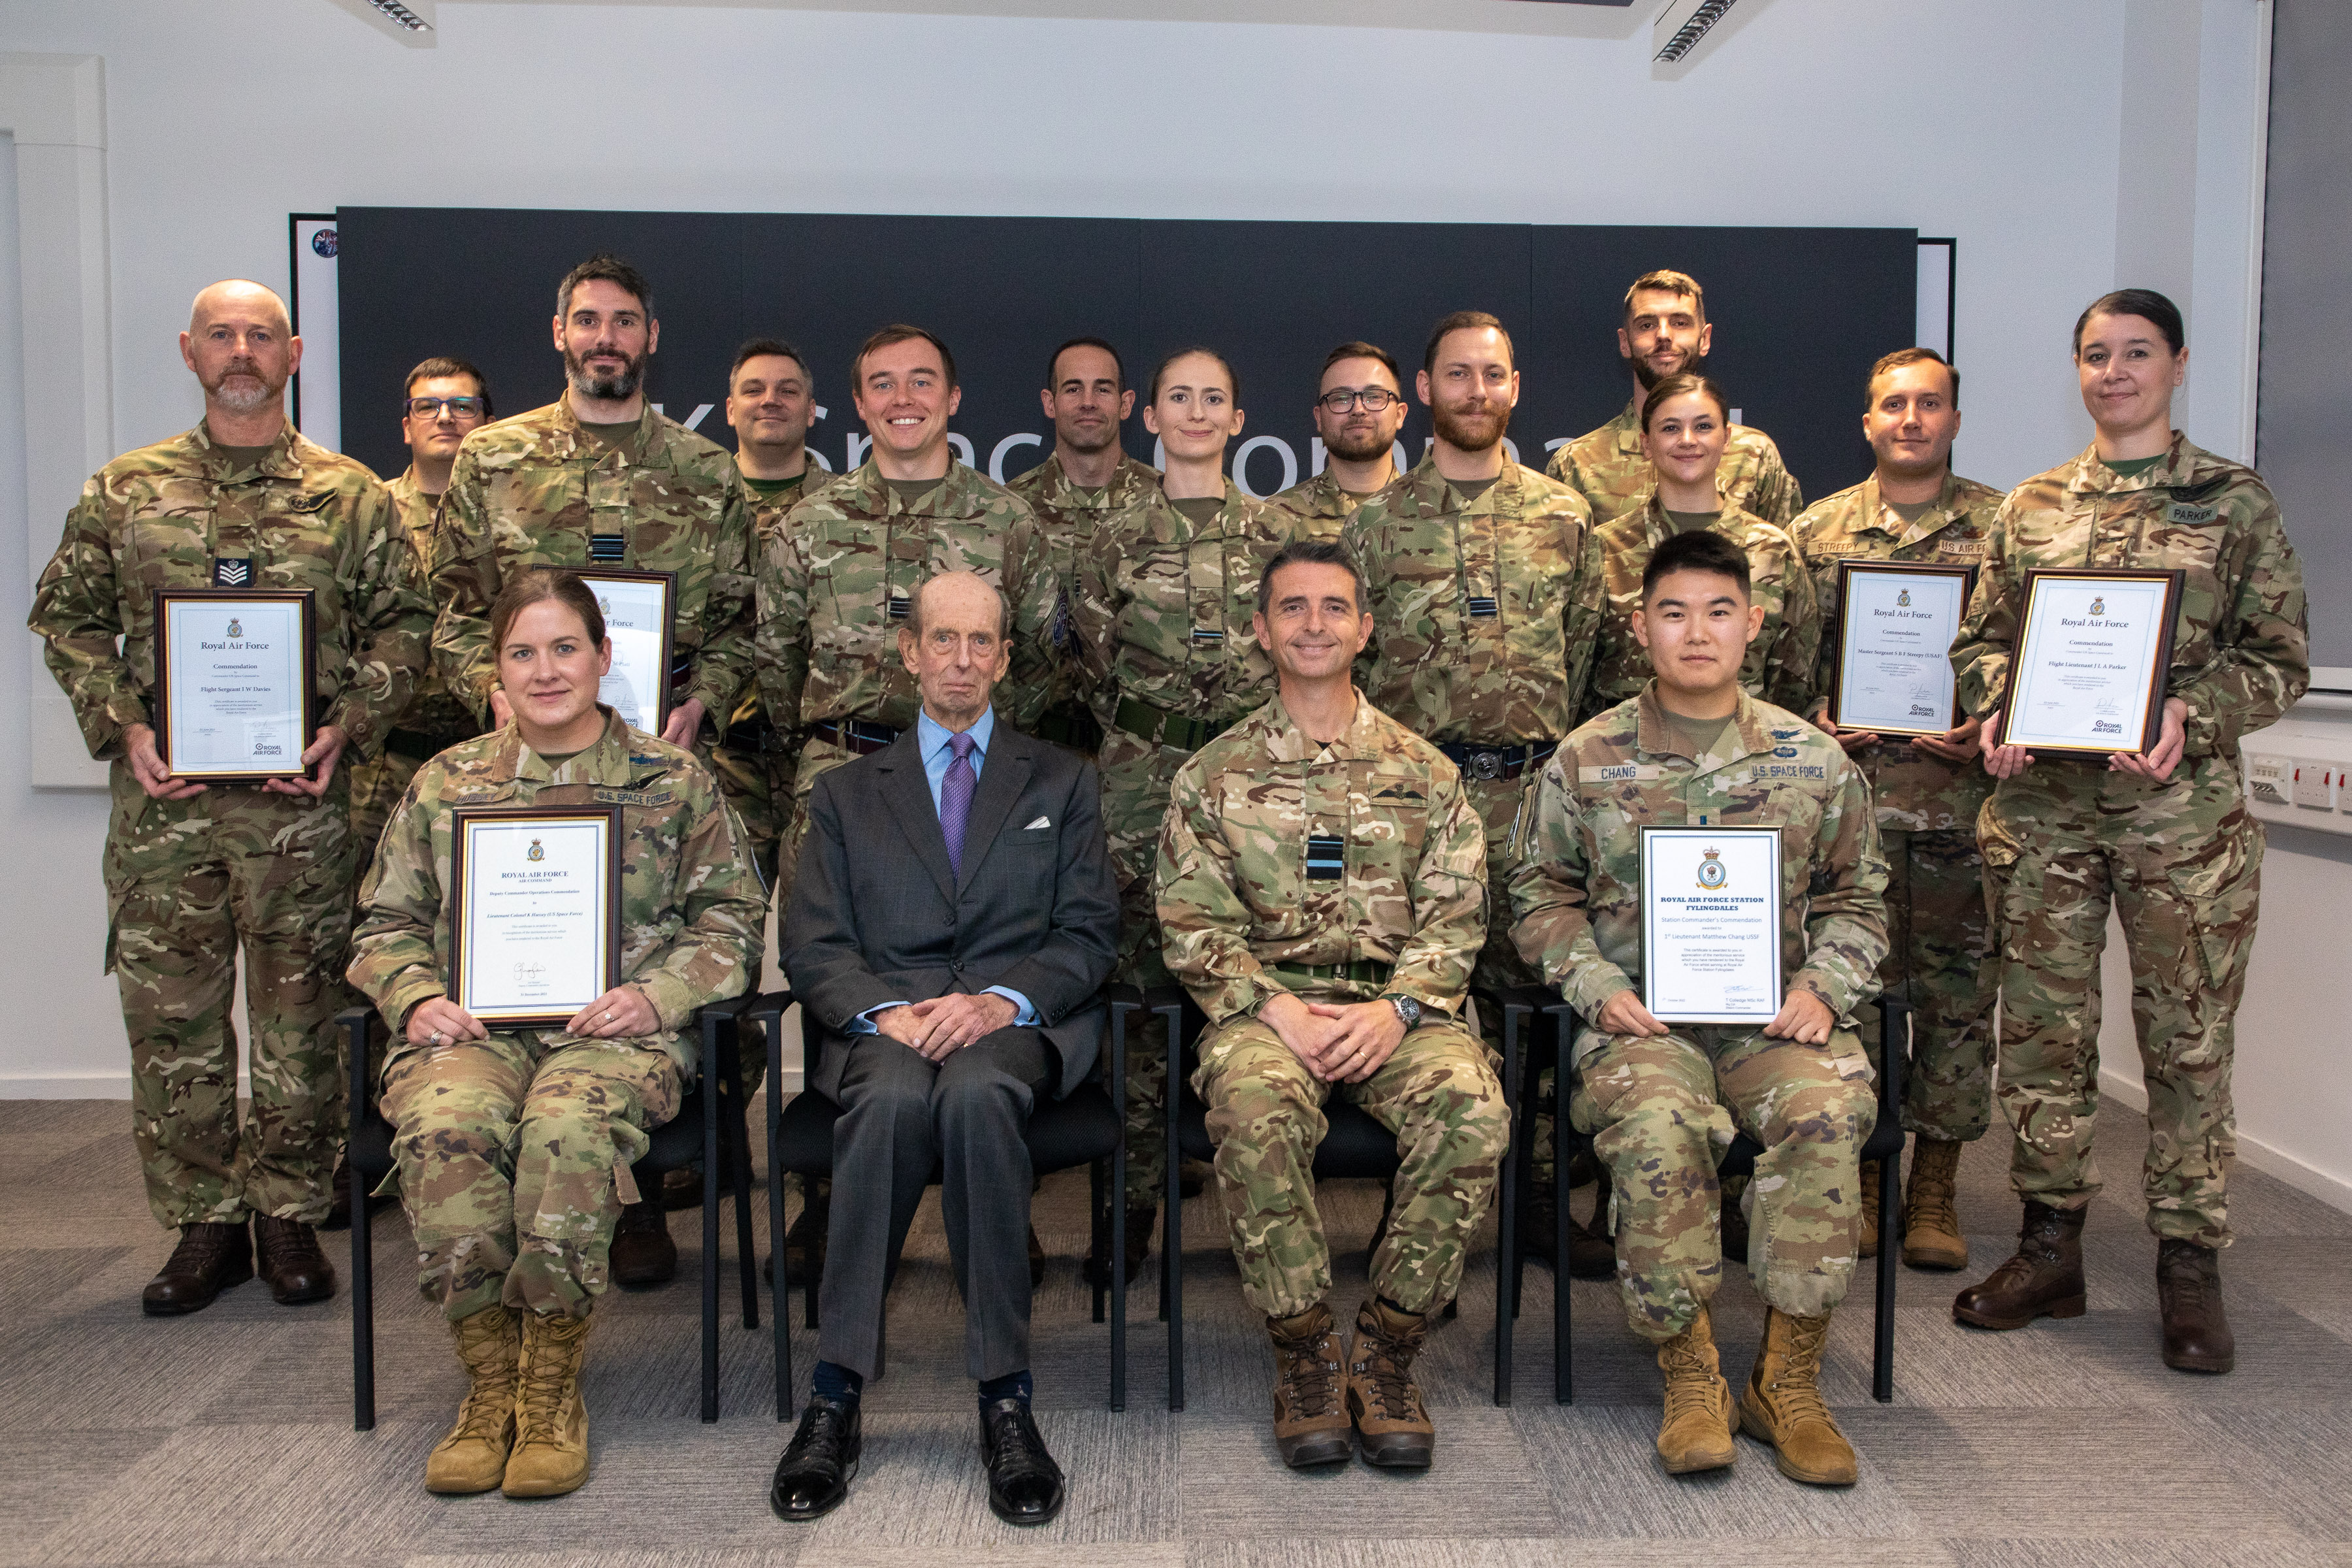 Image shows The Duke of Kent with RAF personnel holding certificates.